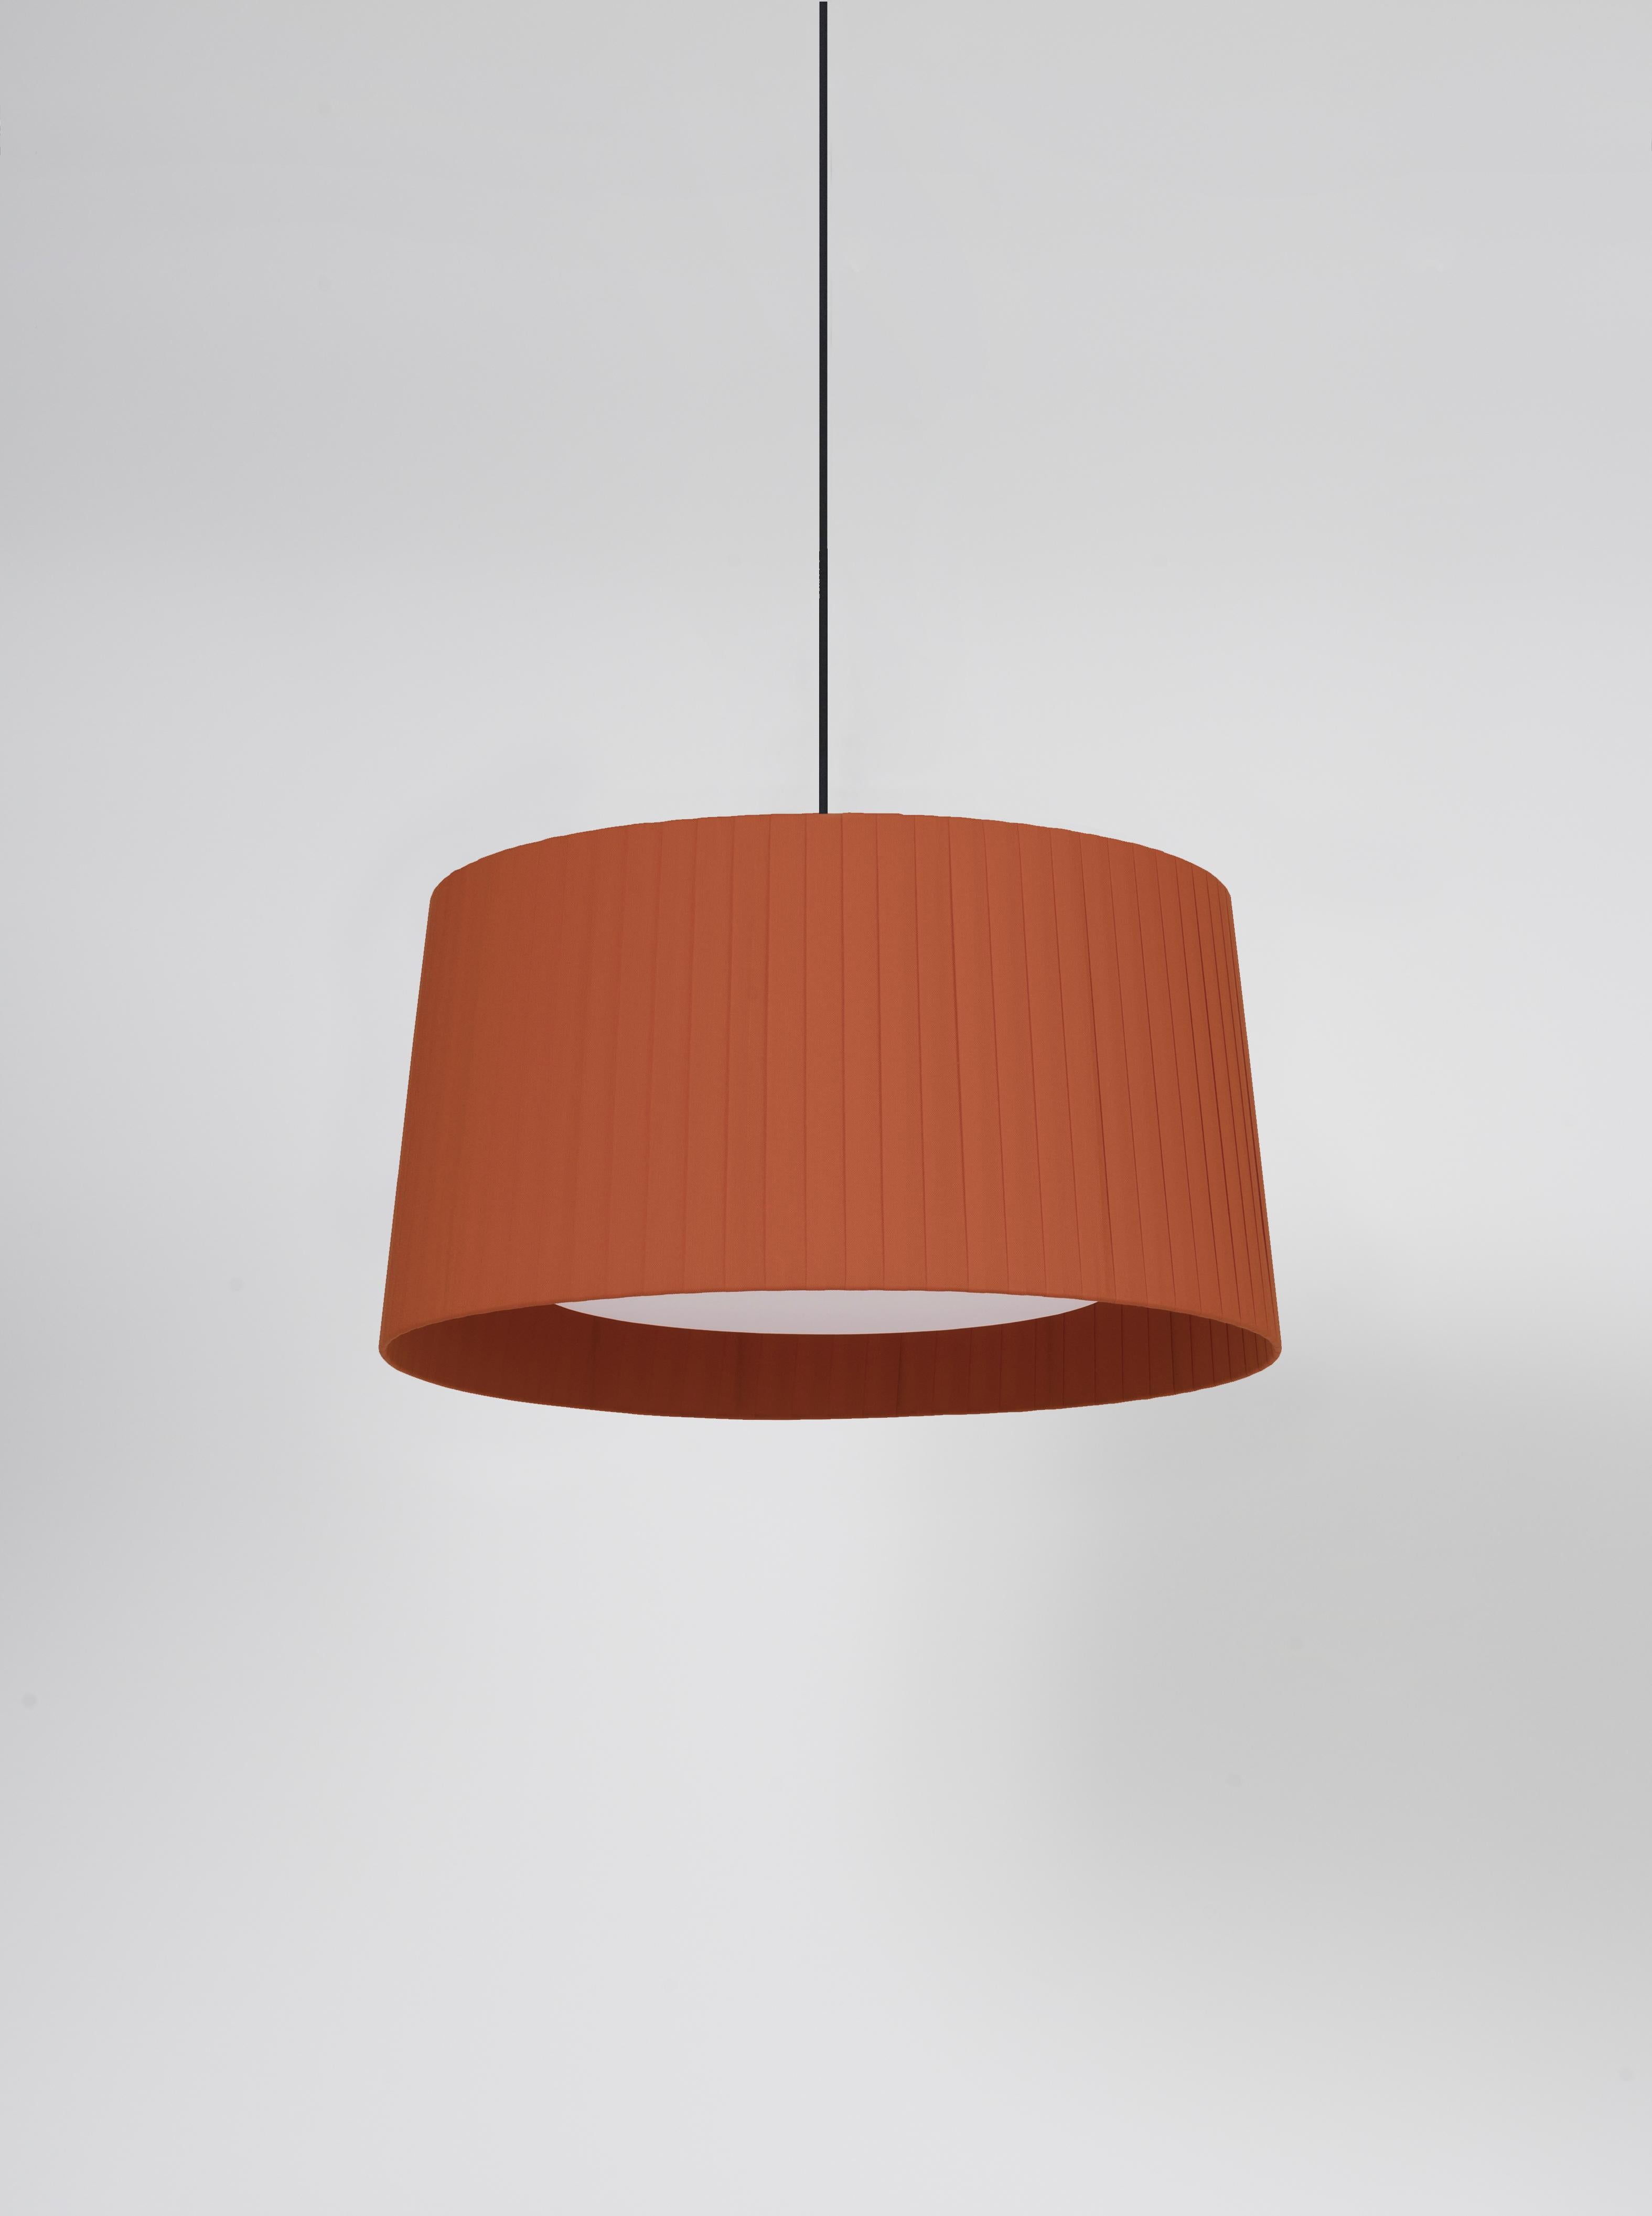 Terracotta GT5 pendant lamp by Santa & Cole
Dimensions: D 62 x H 32 cm
Materials: Metal, ribbon.
Available in other colors. Available in 2 lights version.

Designed for intermediate volumes and household areas, GT5 and GT6 are hanging lamps